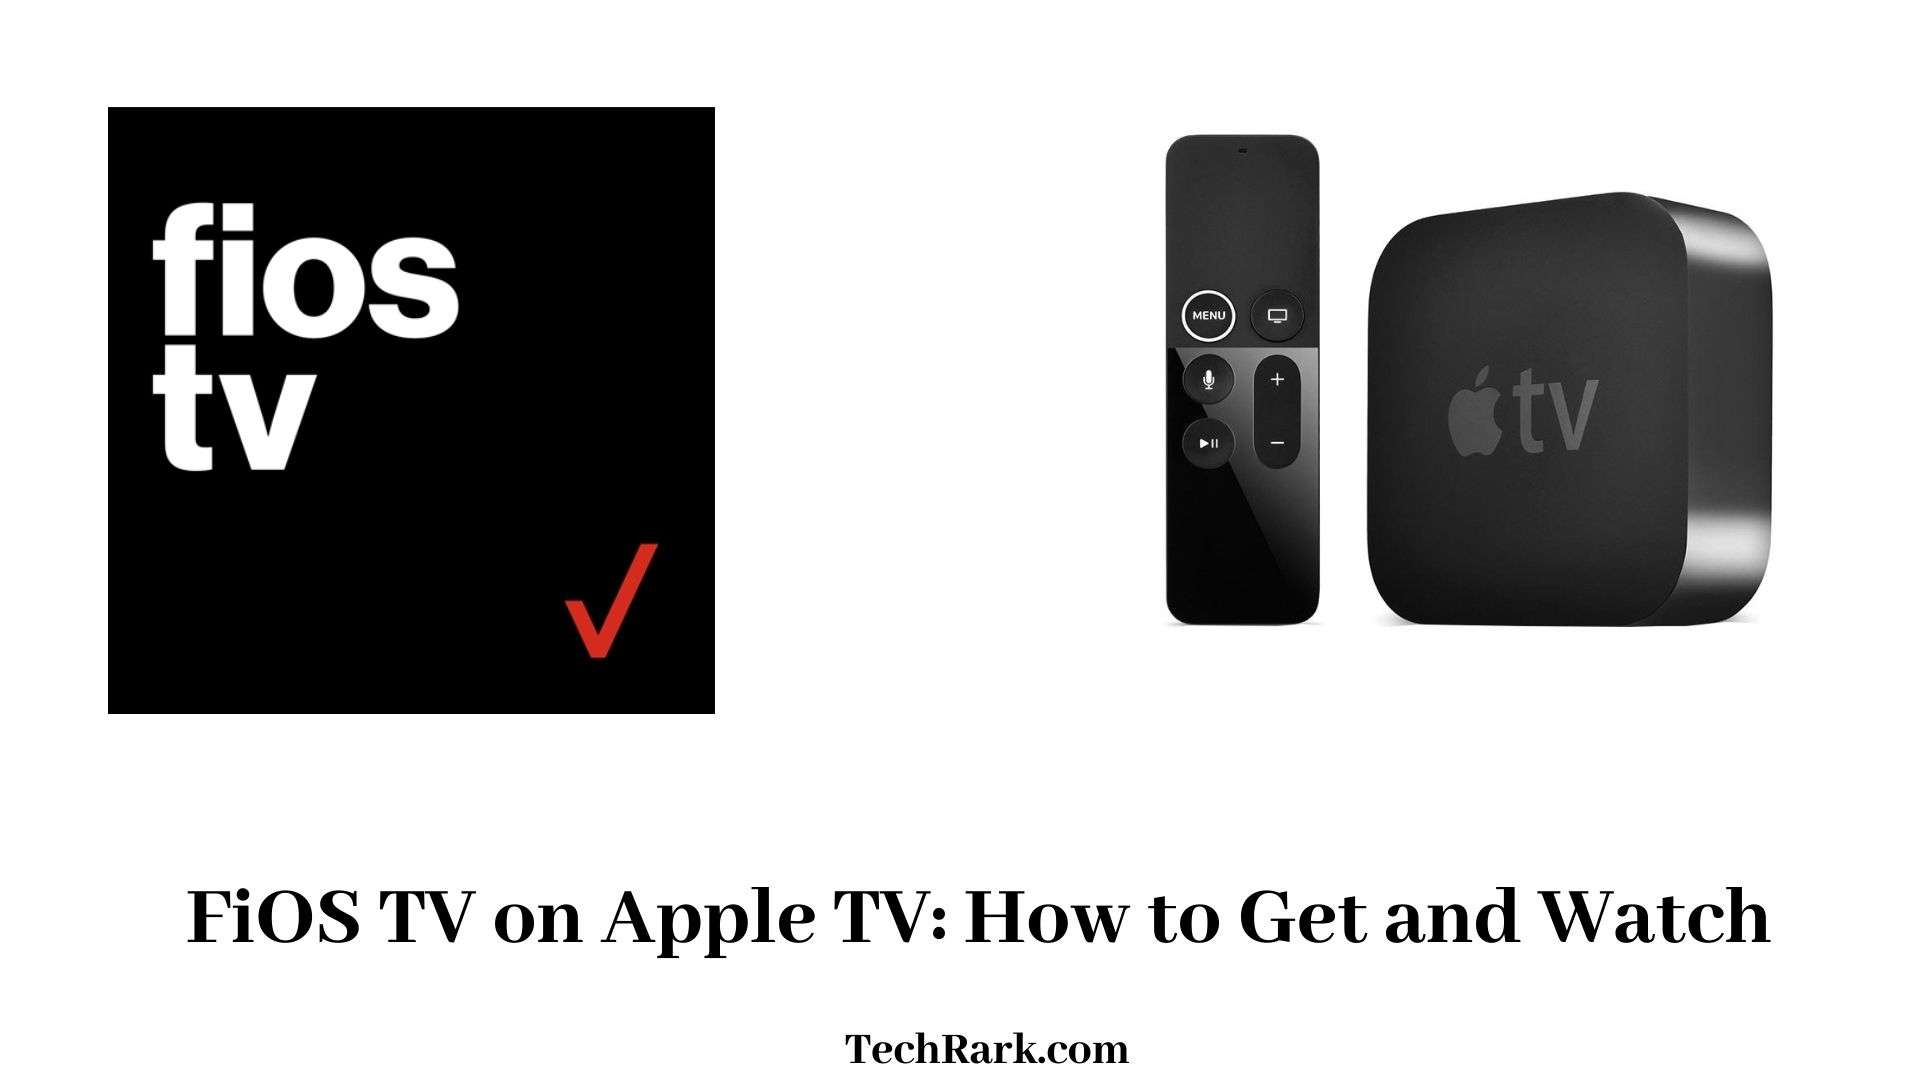 FiOS TV on Apple TV: How to Get and Watch [2021]